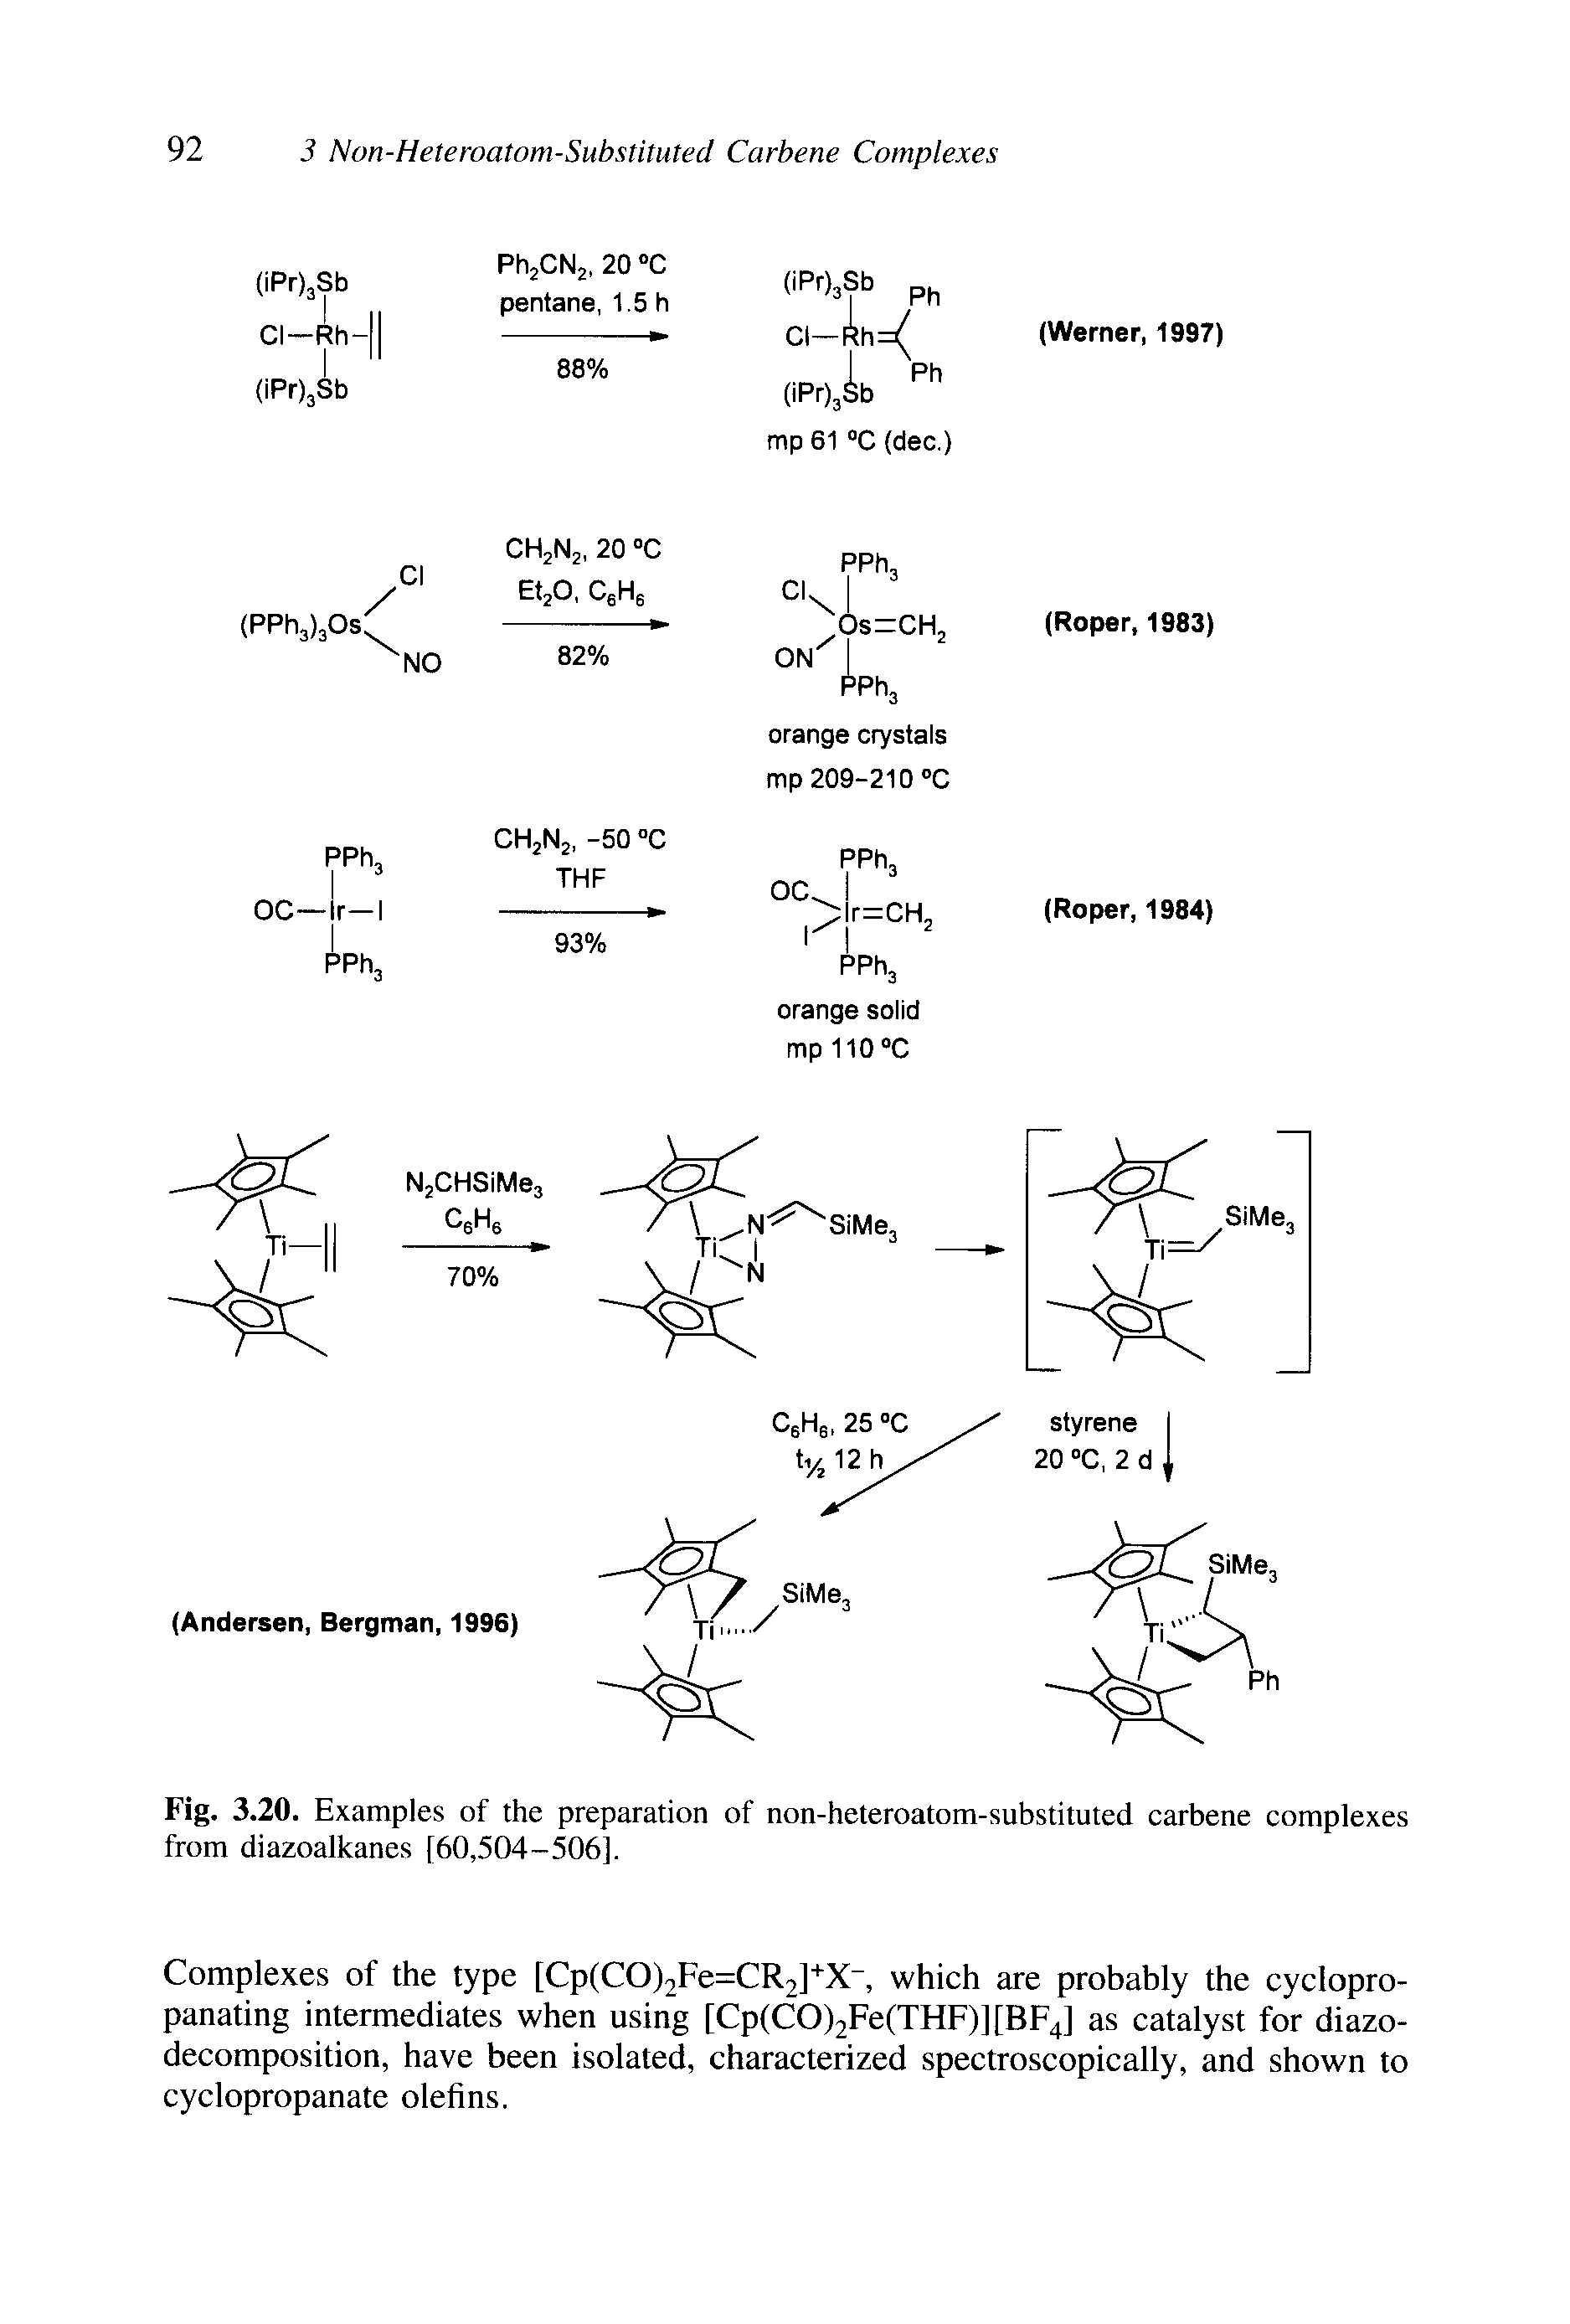 Fig. 3.20. Examples of the preparation of non-heteroatom-substituted carbene complexes from diazoalkanes [60,504-506].